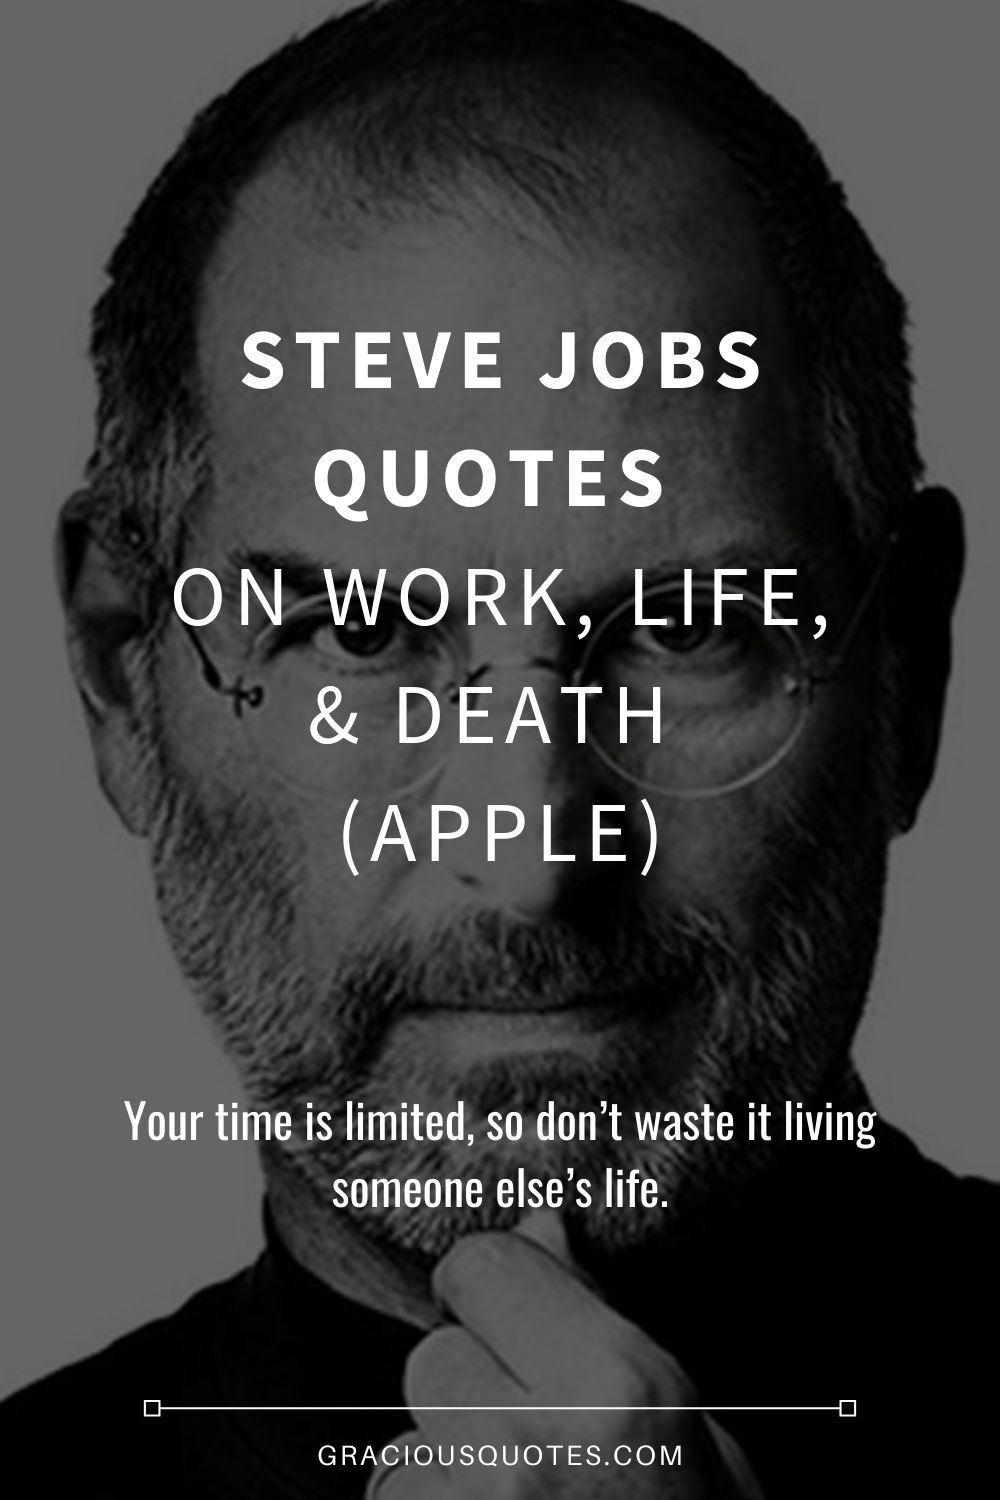 Steve Jobs Quotes on Work, Life, & Death (APPLE) - Gracious Quotes